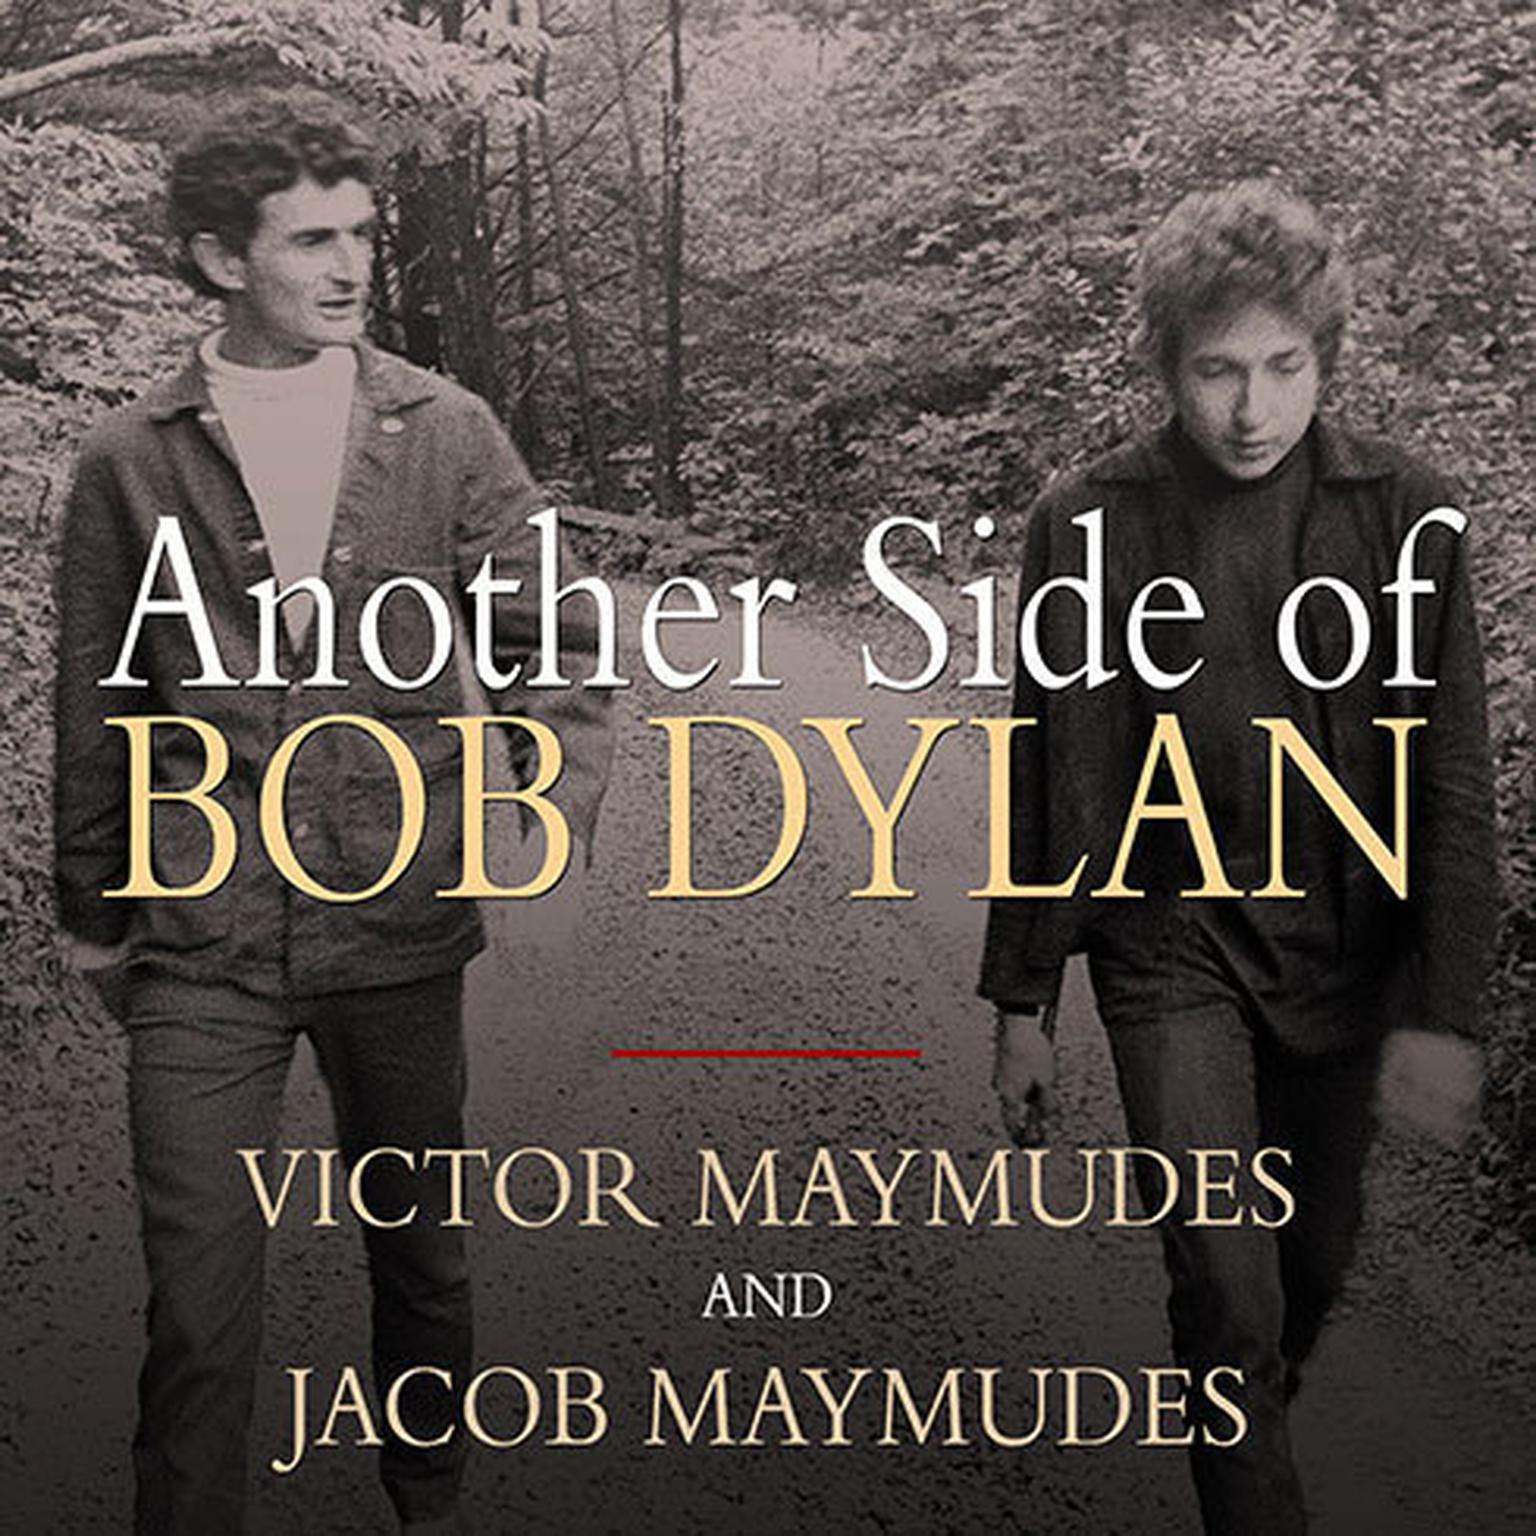 Another Side of Bob Dylan: A Personal History on the Road and Off the Tracks Audiobook, by Jacob Maymudes